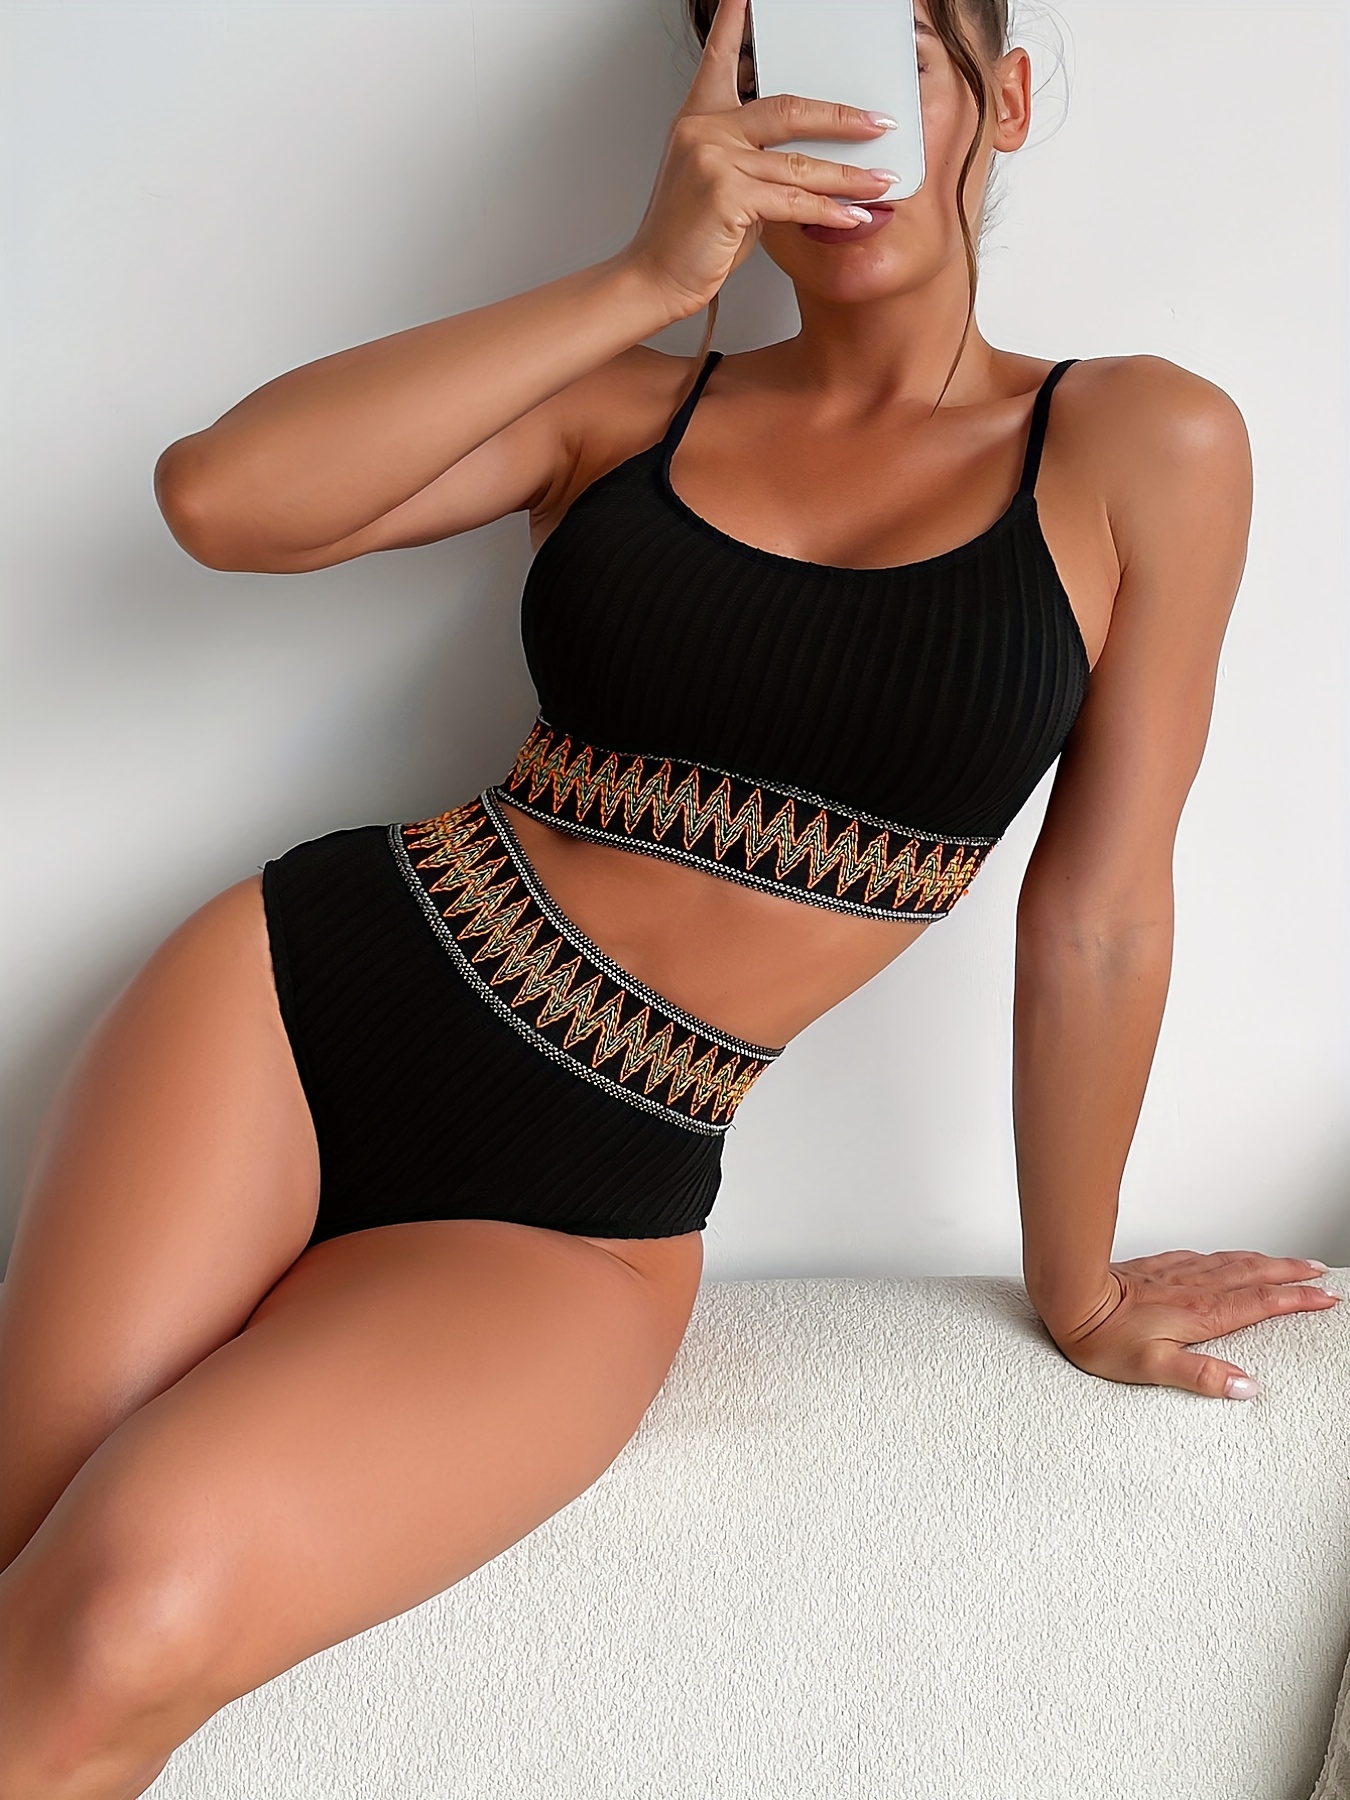  Women's Scoop Neck Cheeky Bikini Sets Crop Top Colorblock  Striped Bottom High Waist Two Piece Swimsuit Bathing Suits (Black,S) :  Clothing, Shoes & Jewelry